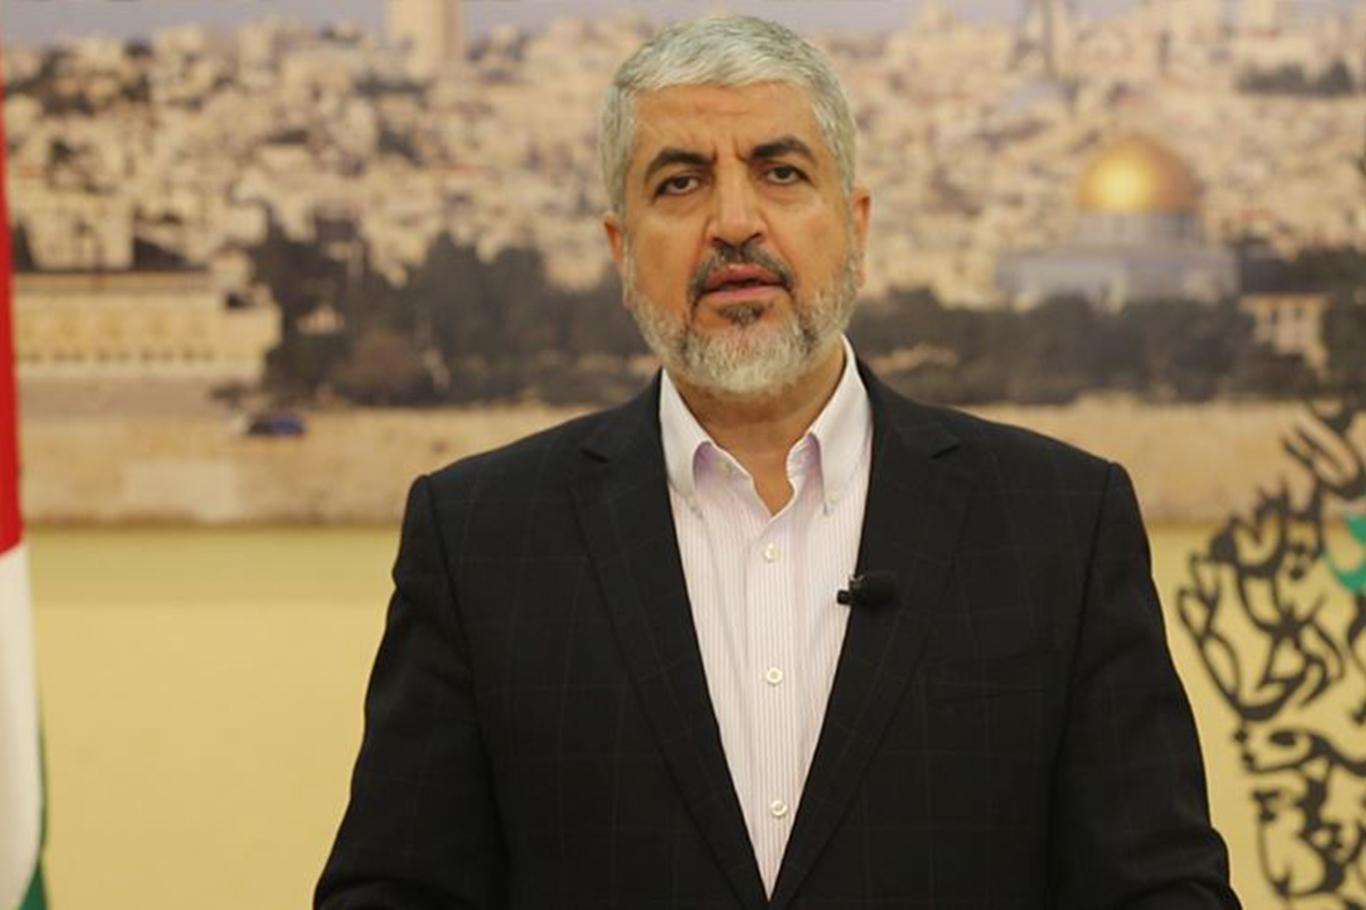 Hamas: We should follow in Saladin’s footsteps to liberate Jerusalem from zionist occupation